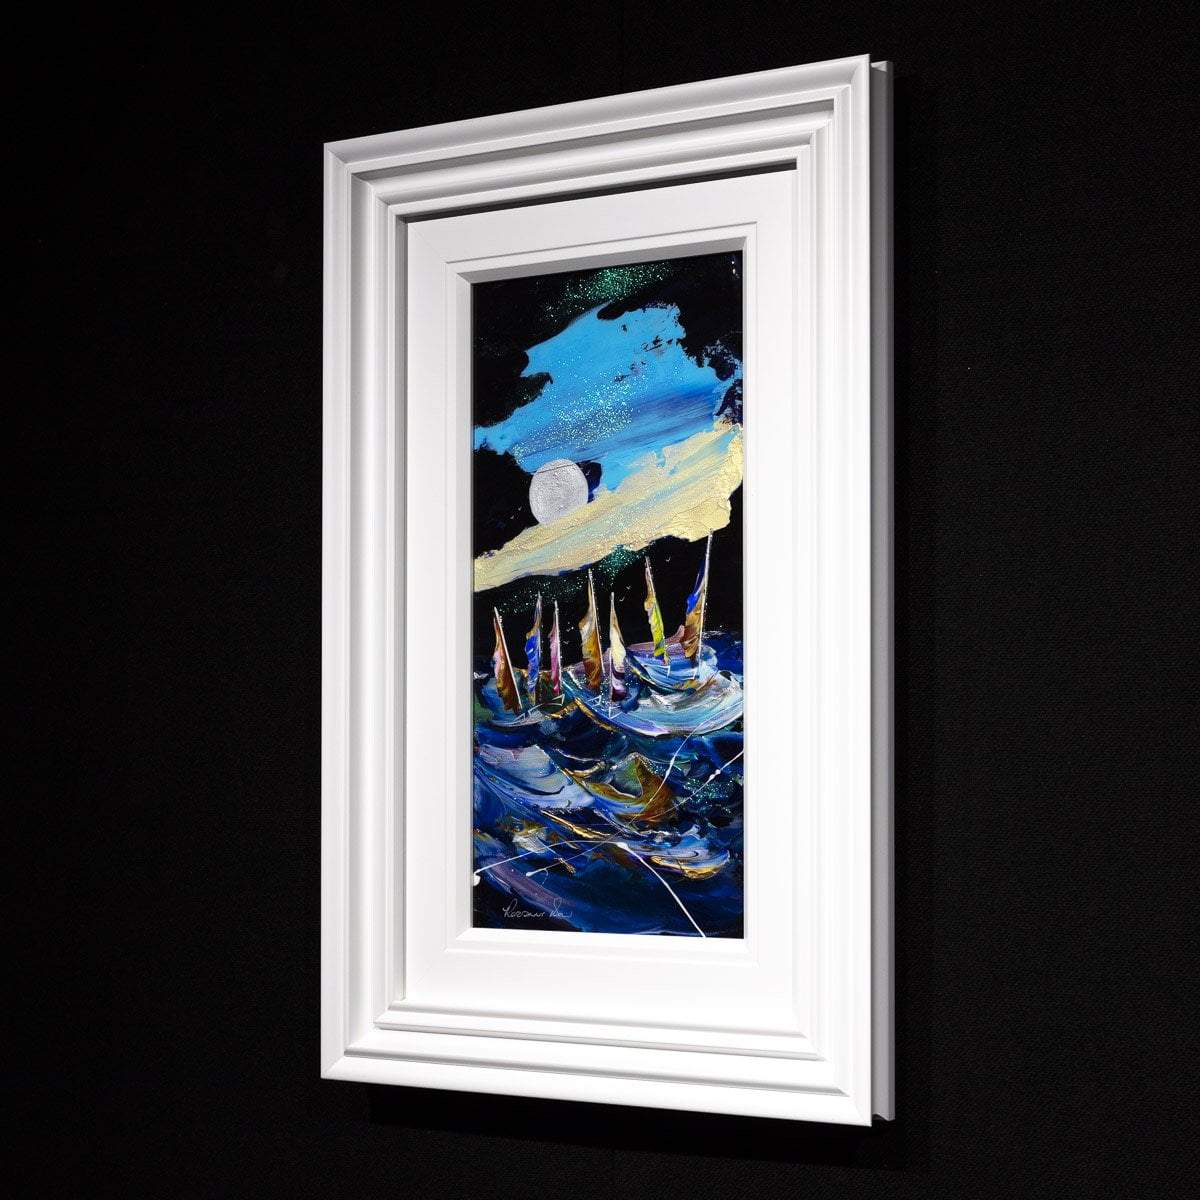 Chasing the Night - Original Rozanne Bell Framed